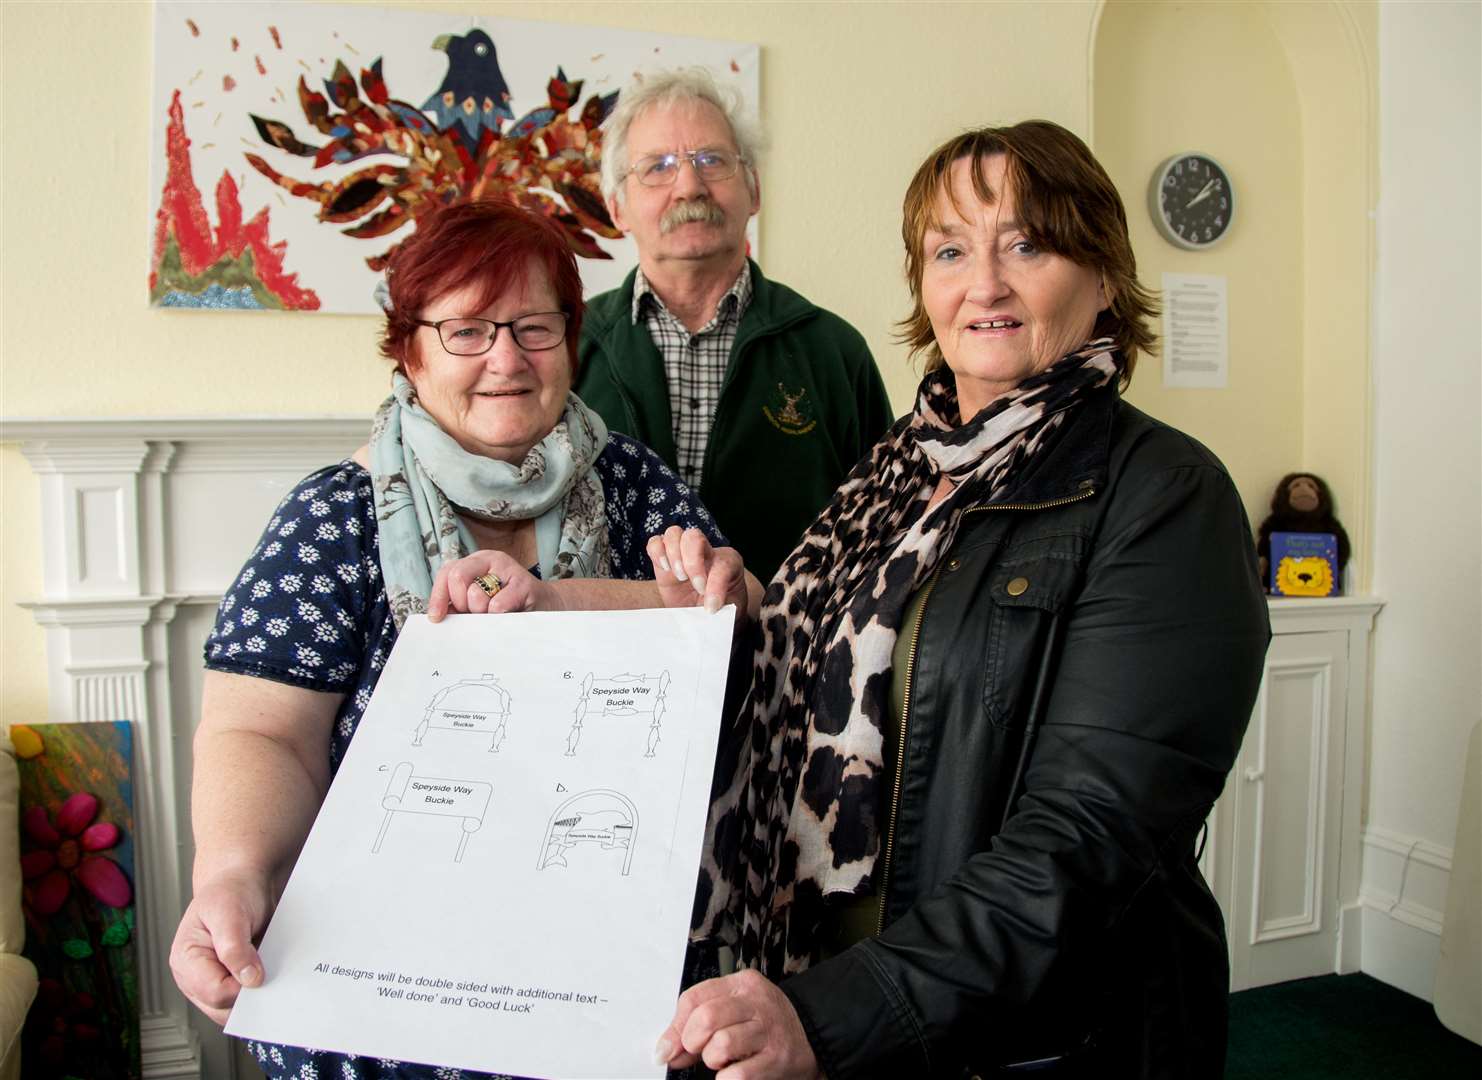 Buckie's Roots chairwoman Meg Jamieson (front left) is joined by committee members Morag Stewart and Archie Jamieson in admiring the final four designs. Picture: Becky Saunderson